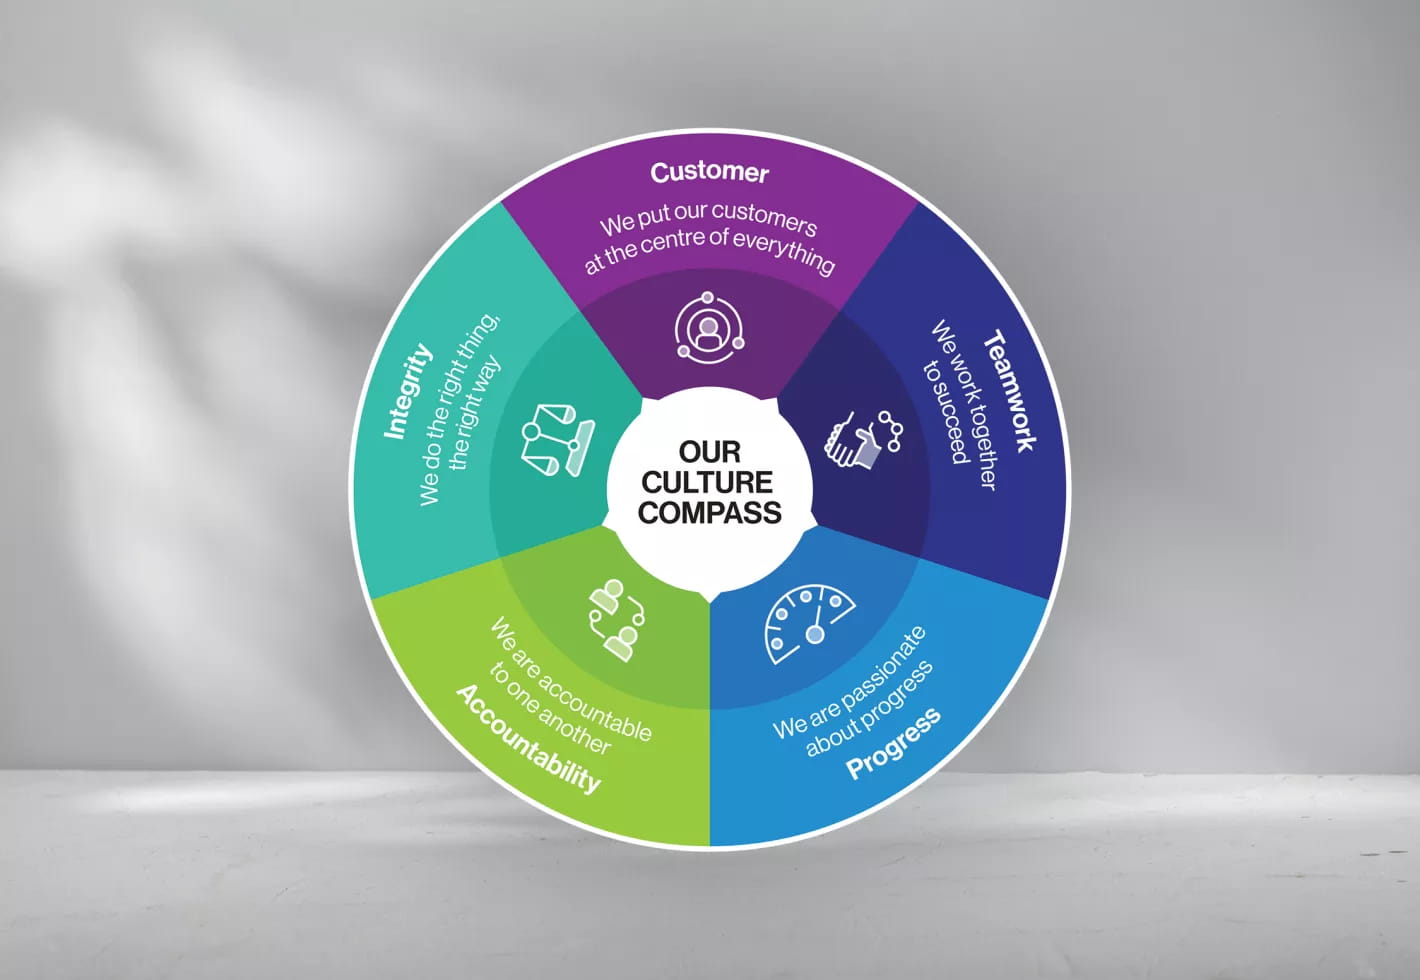 Our Values guide how we deliver